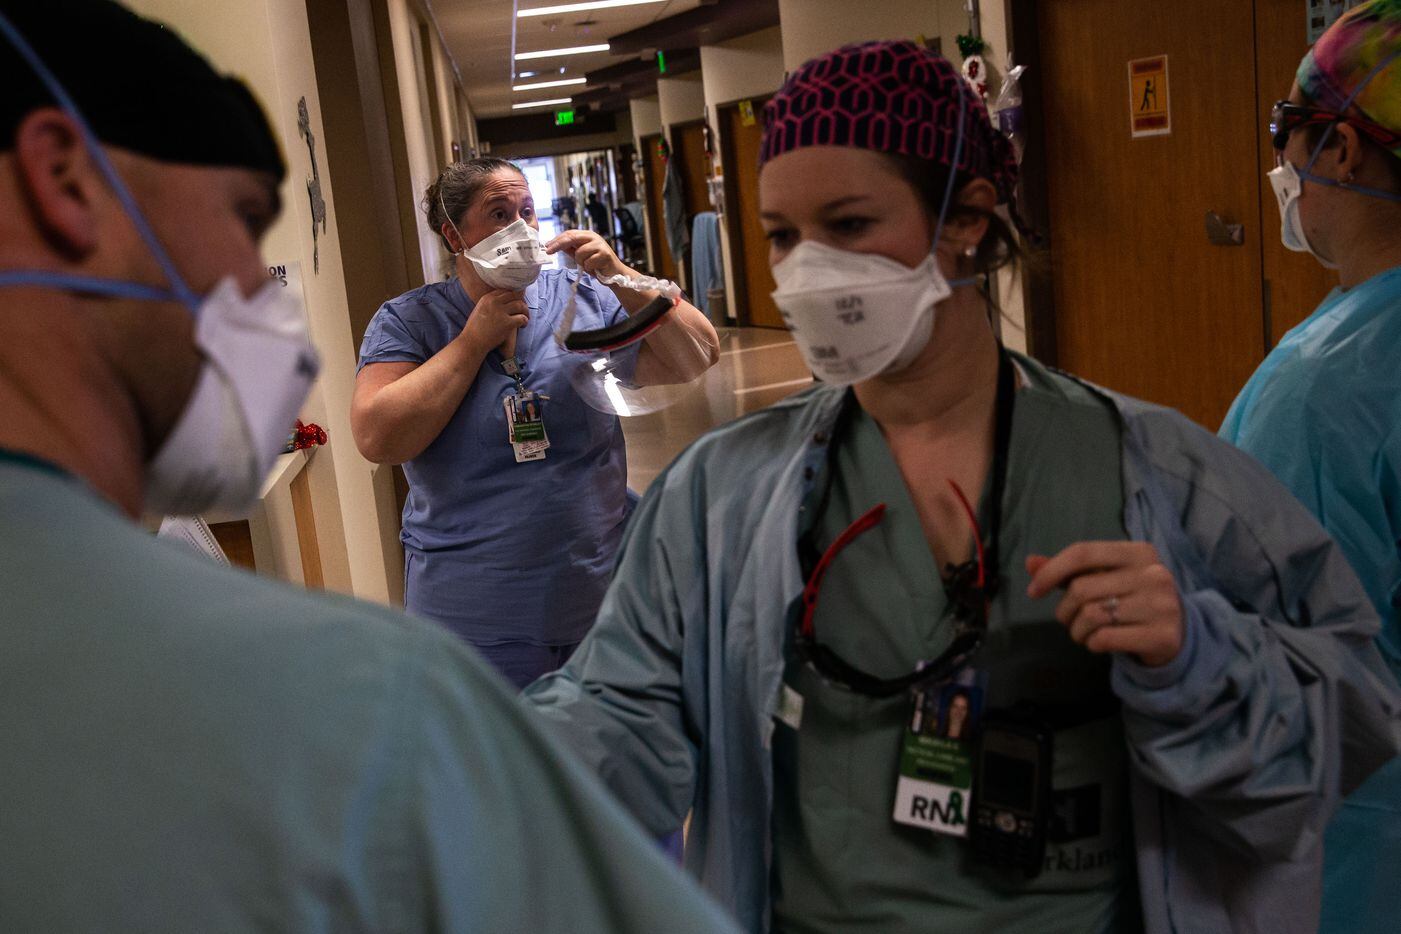 Rowley (center) suits up with personal protective equipment to help with a patient’s intubation in the COVID-19 Tactical Care Unit. Rowley described her help on the floor with patient care as “intermittent,” but said she jumps in to help her staff as needed. “I honestly like to interact,” she said.